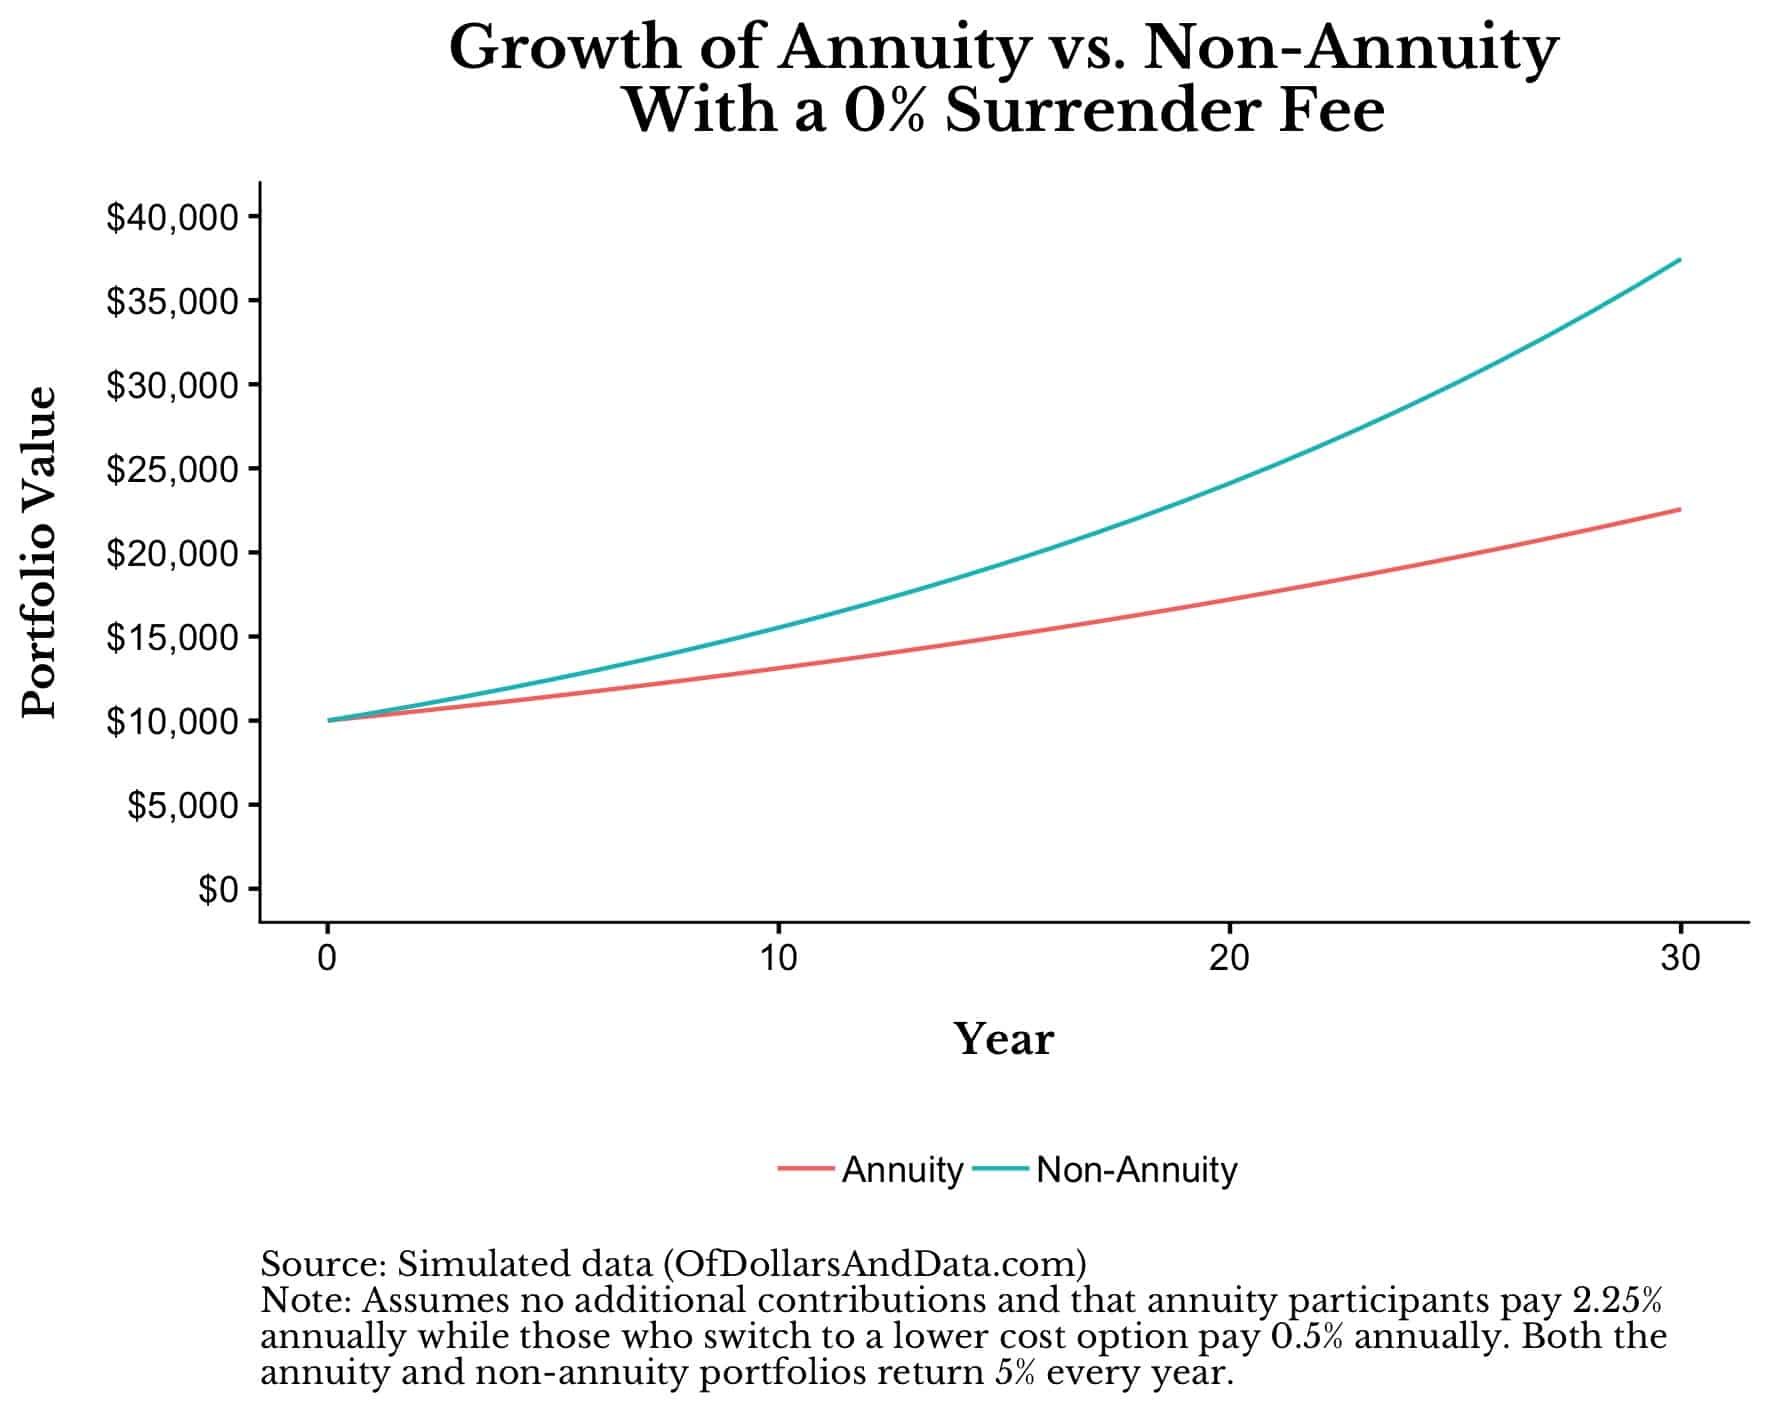 Growth of annuity vs. non-annuity with 0% surrender fee